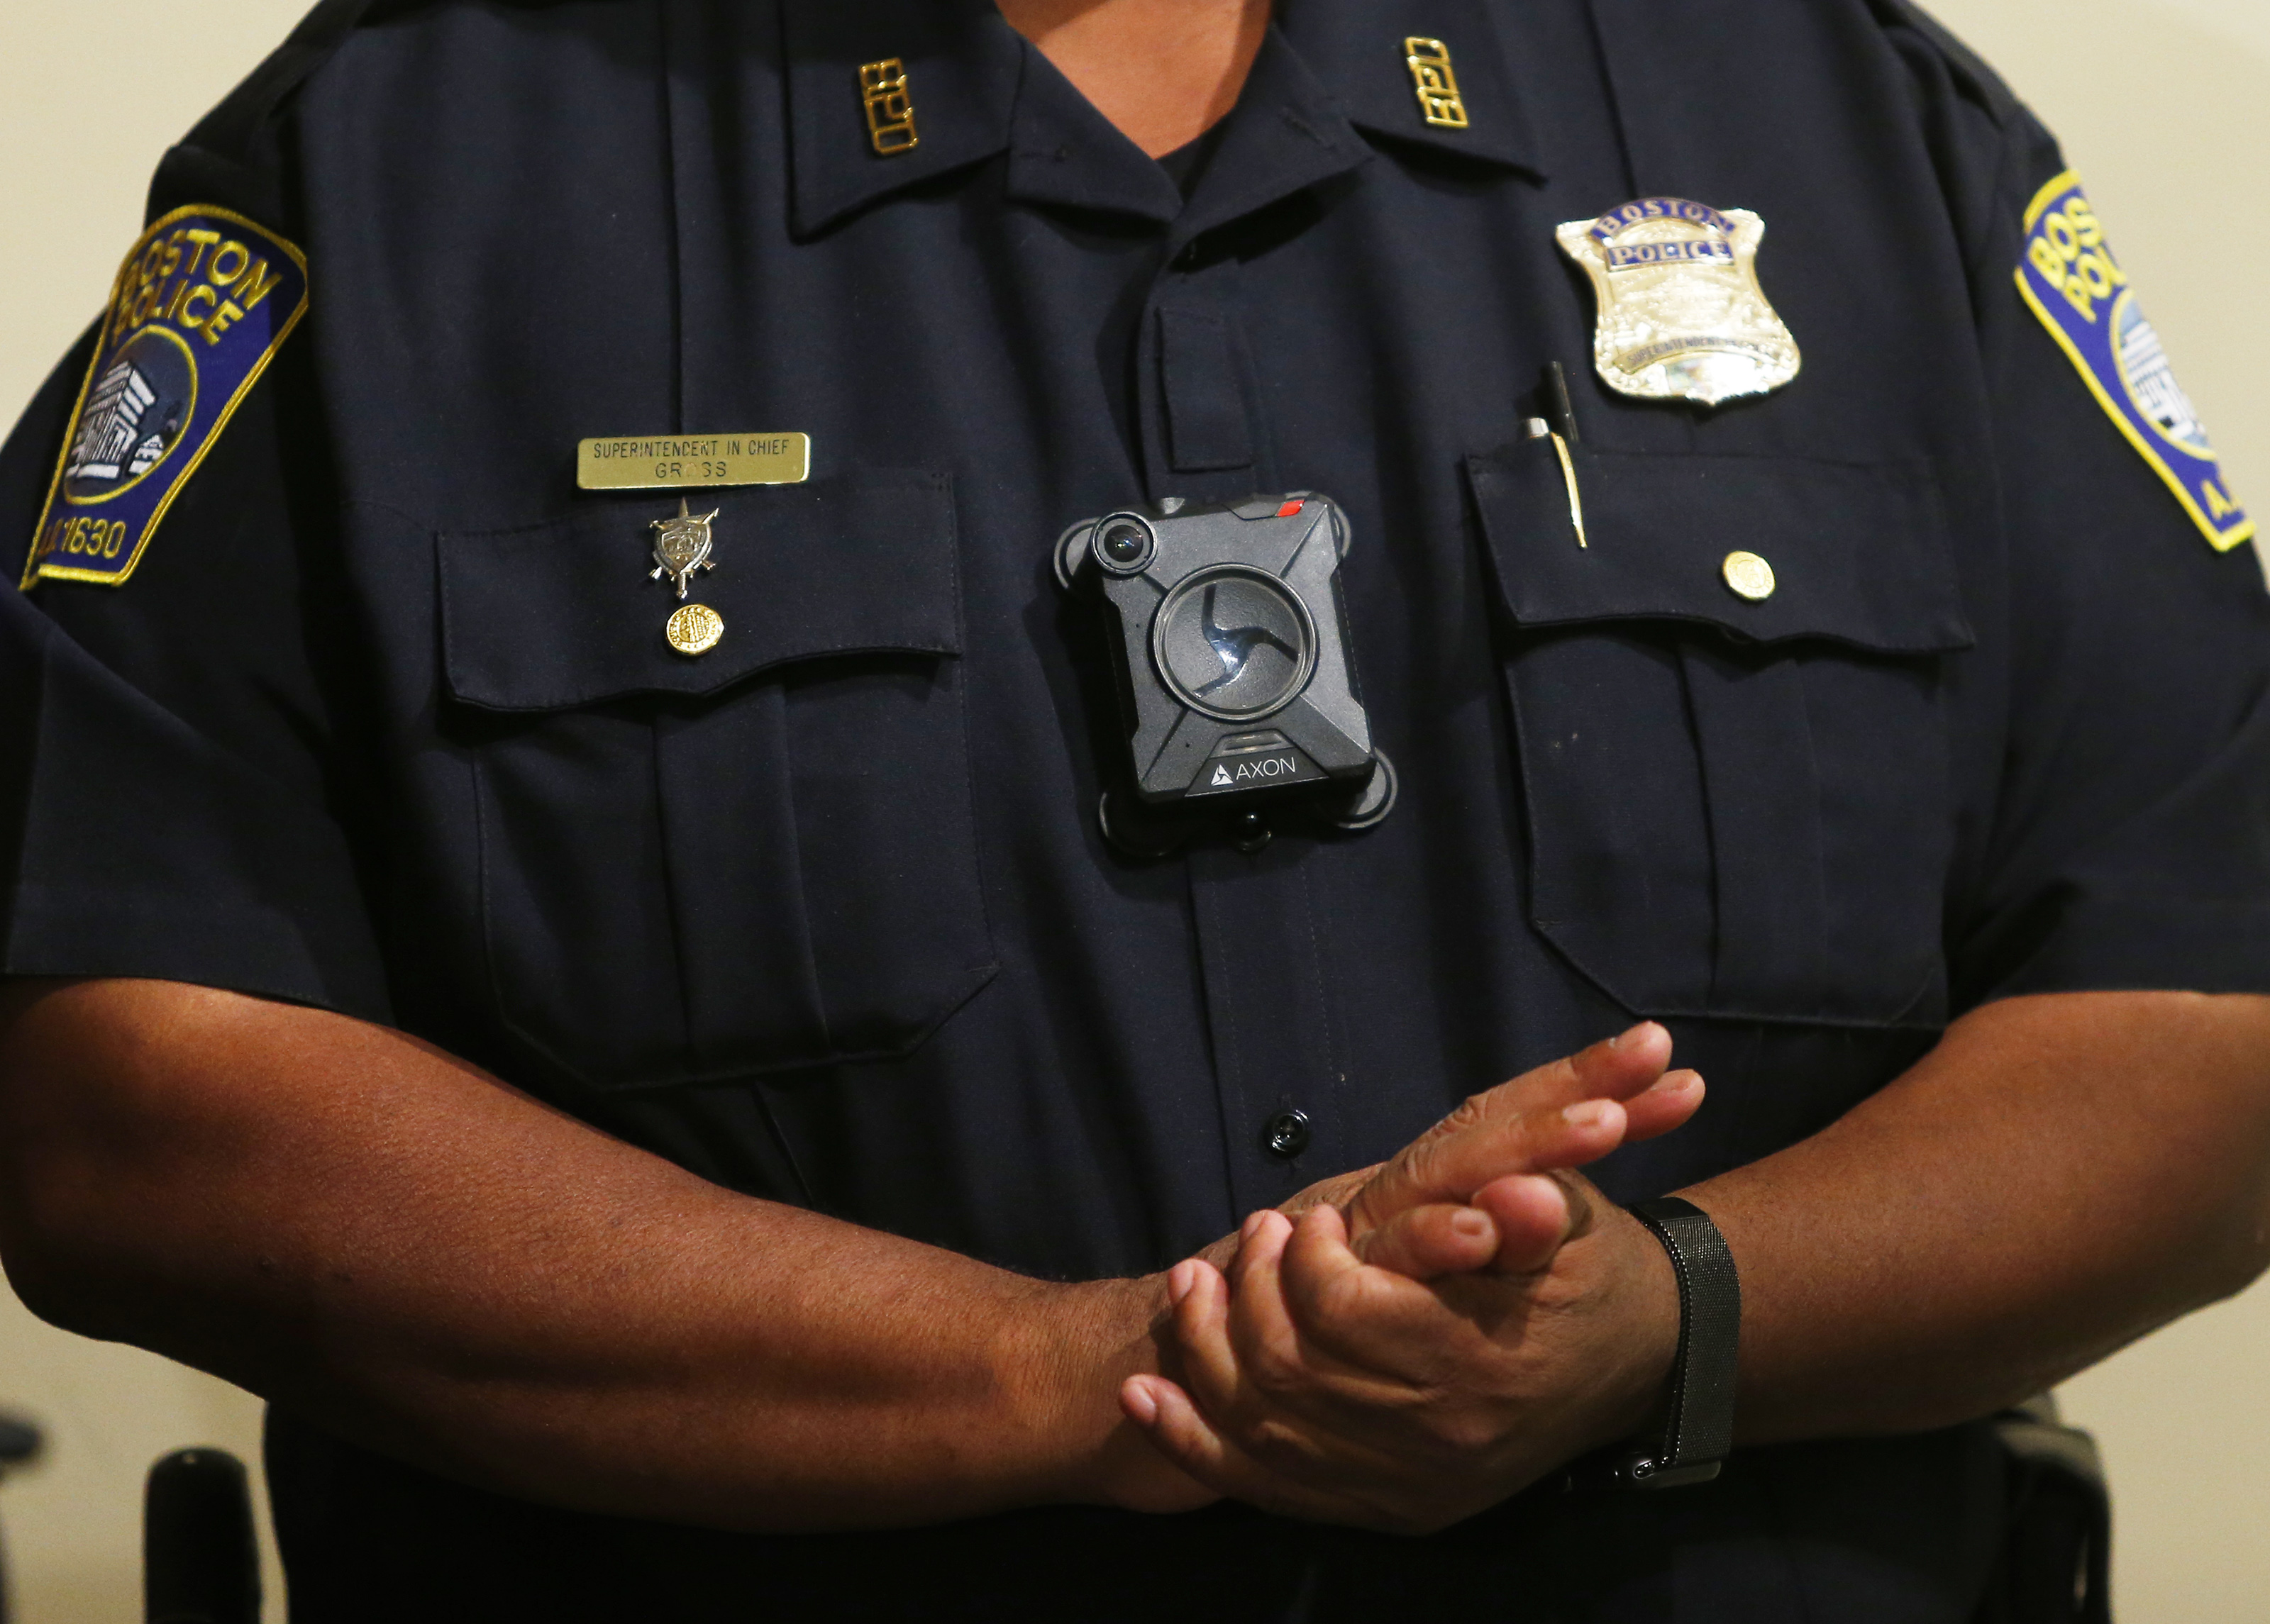 Boston Police Superintendent in Chief William Gross wears a body camera during a press conference at Police Headquarters in Boston on Sept. 20, 2016. (Jessica Rinaldi&mdash;Boston Globe via Getty Images)